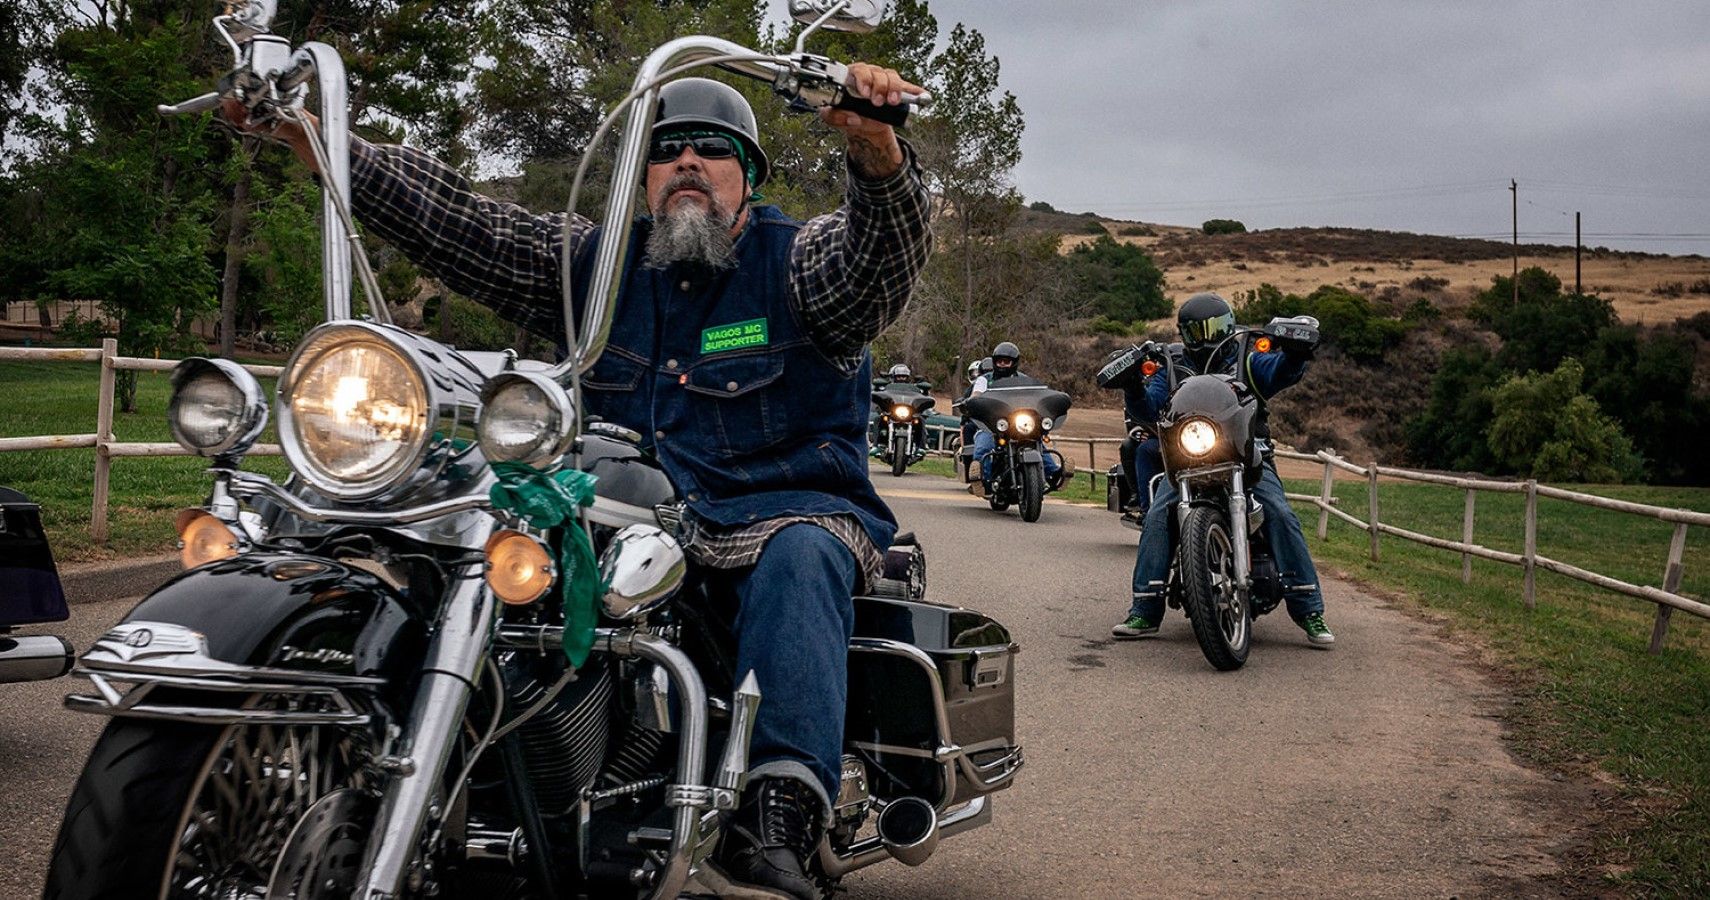 An In-depth Look At The Vagos Motorcycle Club